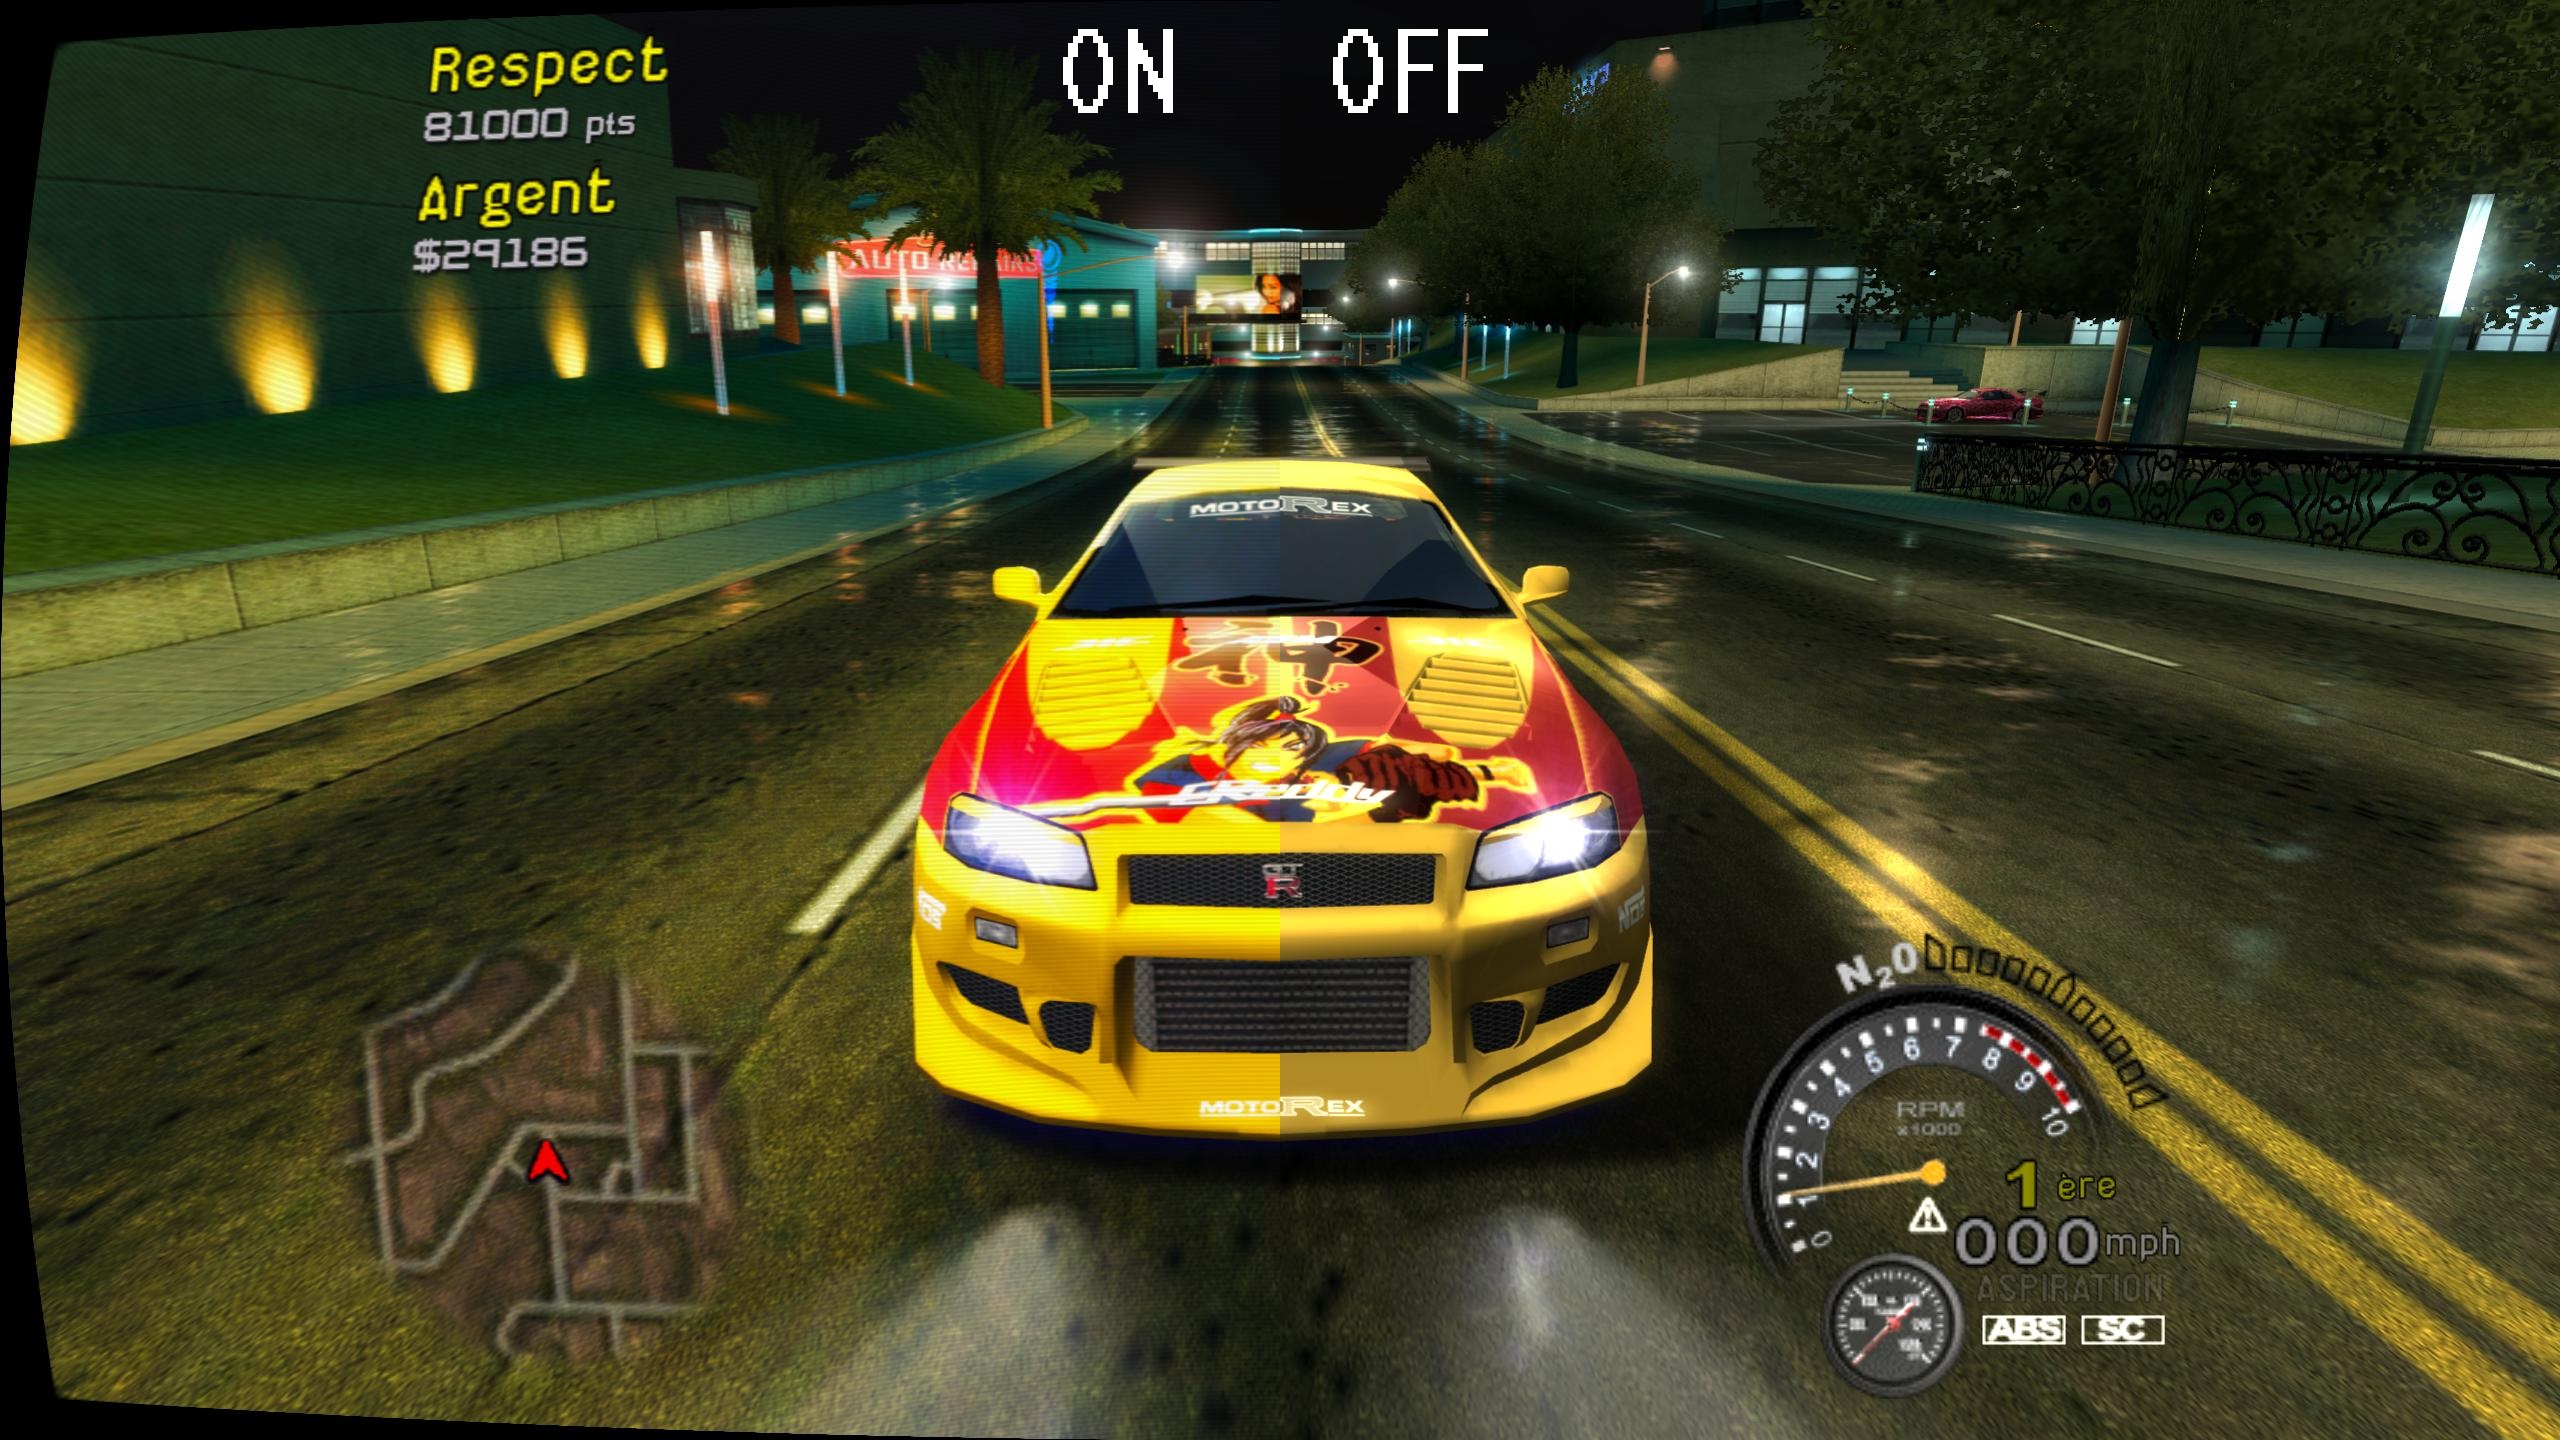  Street Racing Syndicate PS2 COMPLETE : Video Games